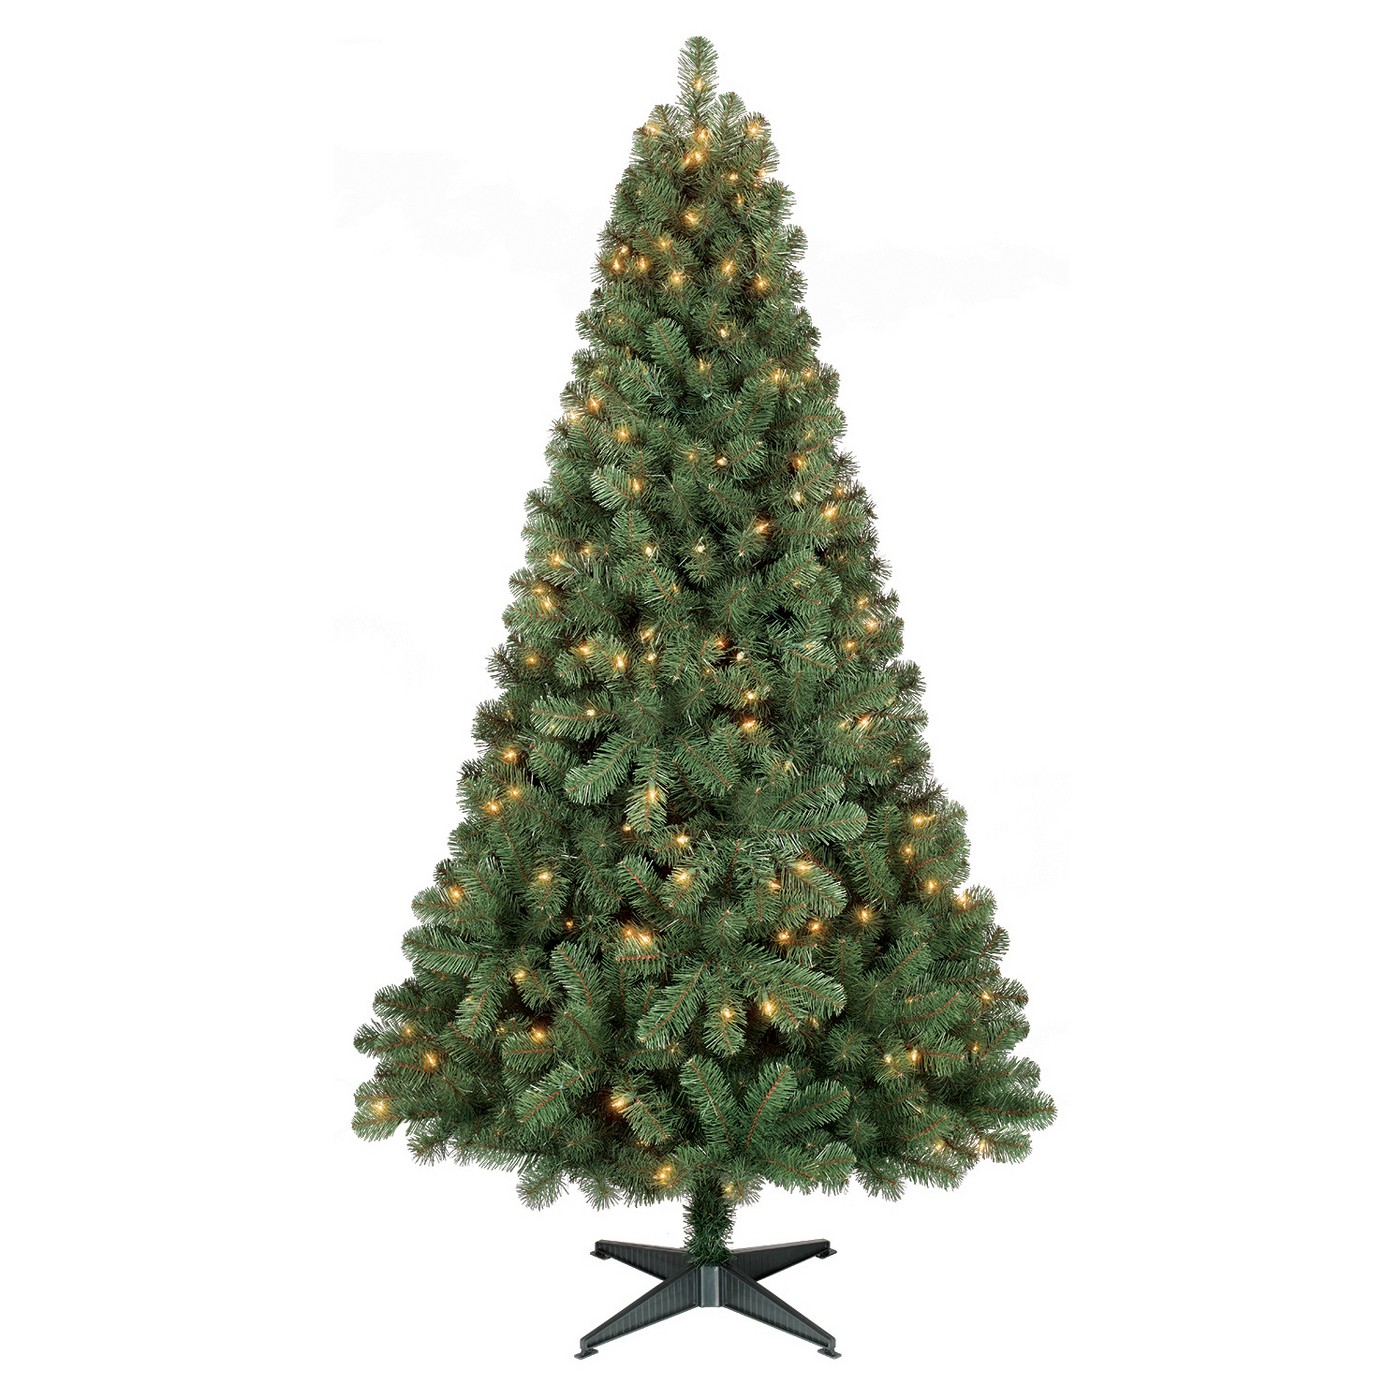 6ft Prelit Artificial Christmas Tree Alberta Spruce Clear Lights Only $30 For REDcard Holders!